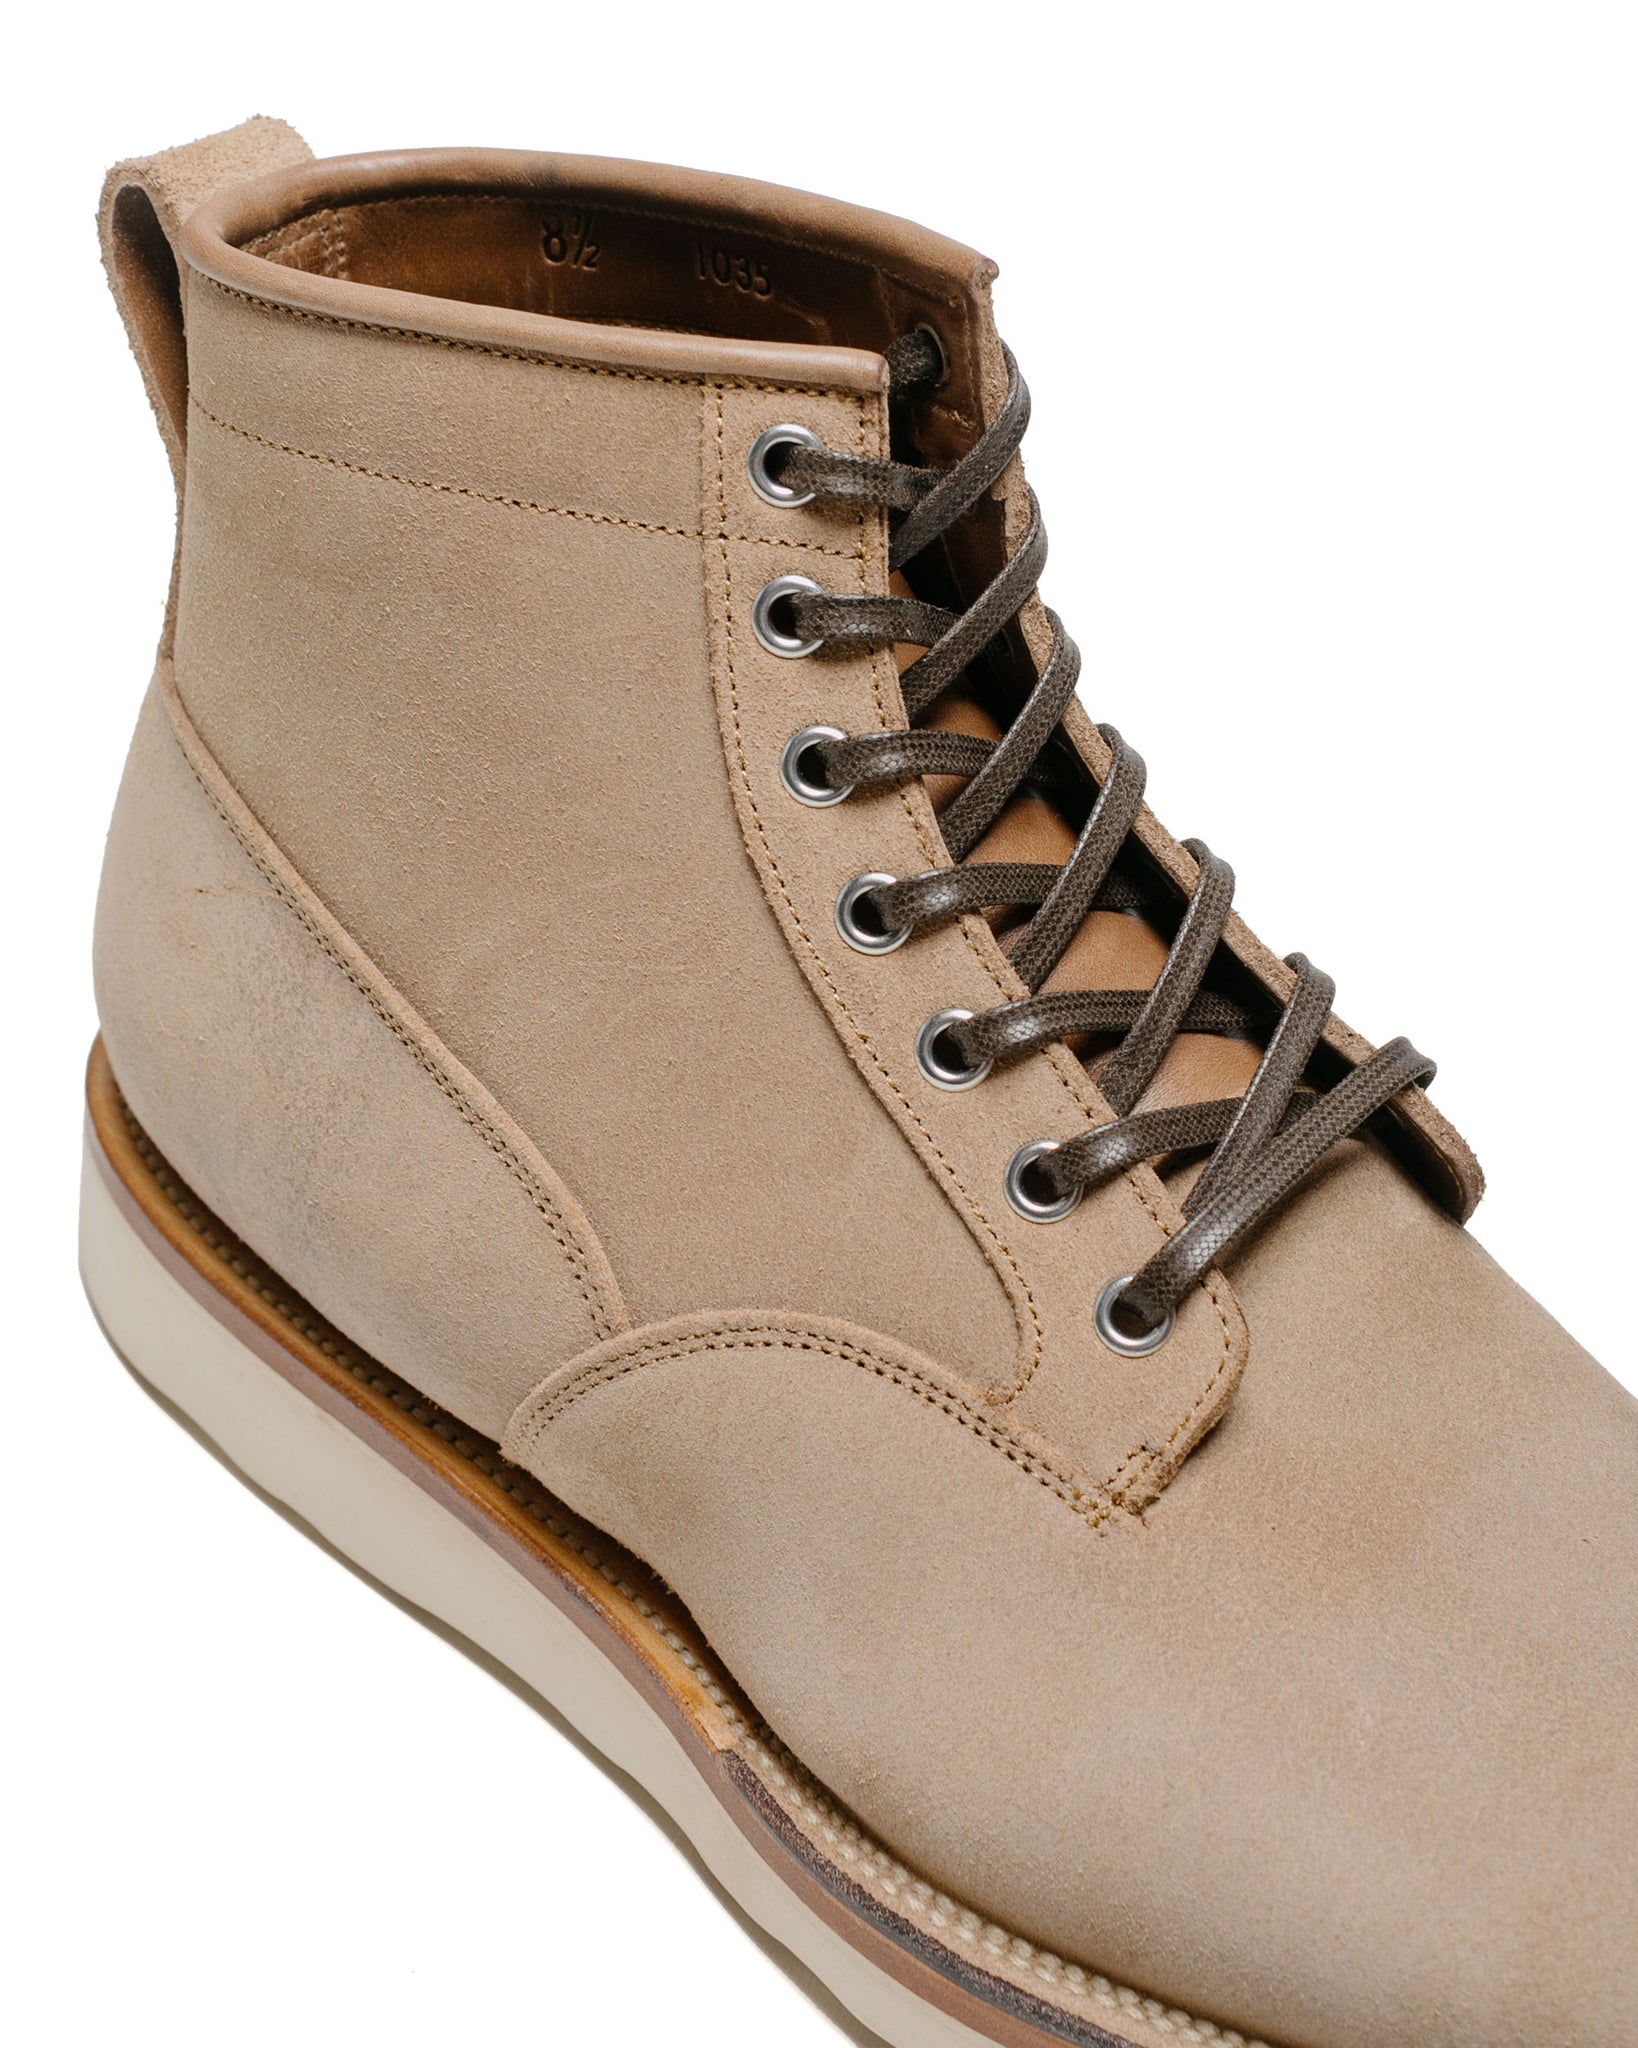 Viberg 1035 Scout Boot Natural Chromexcel Roughout close